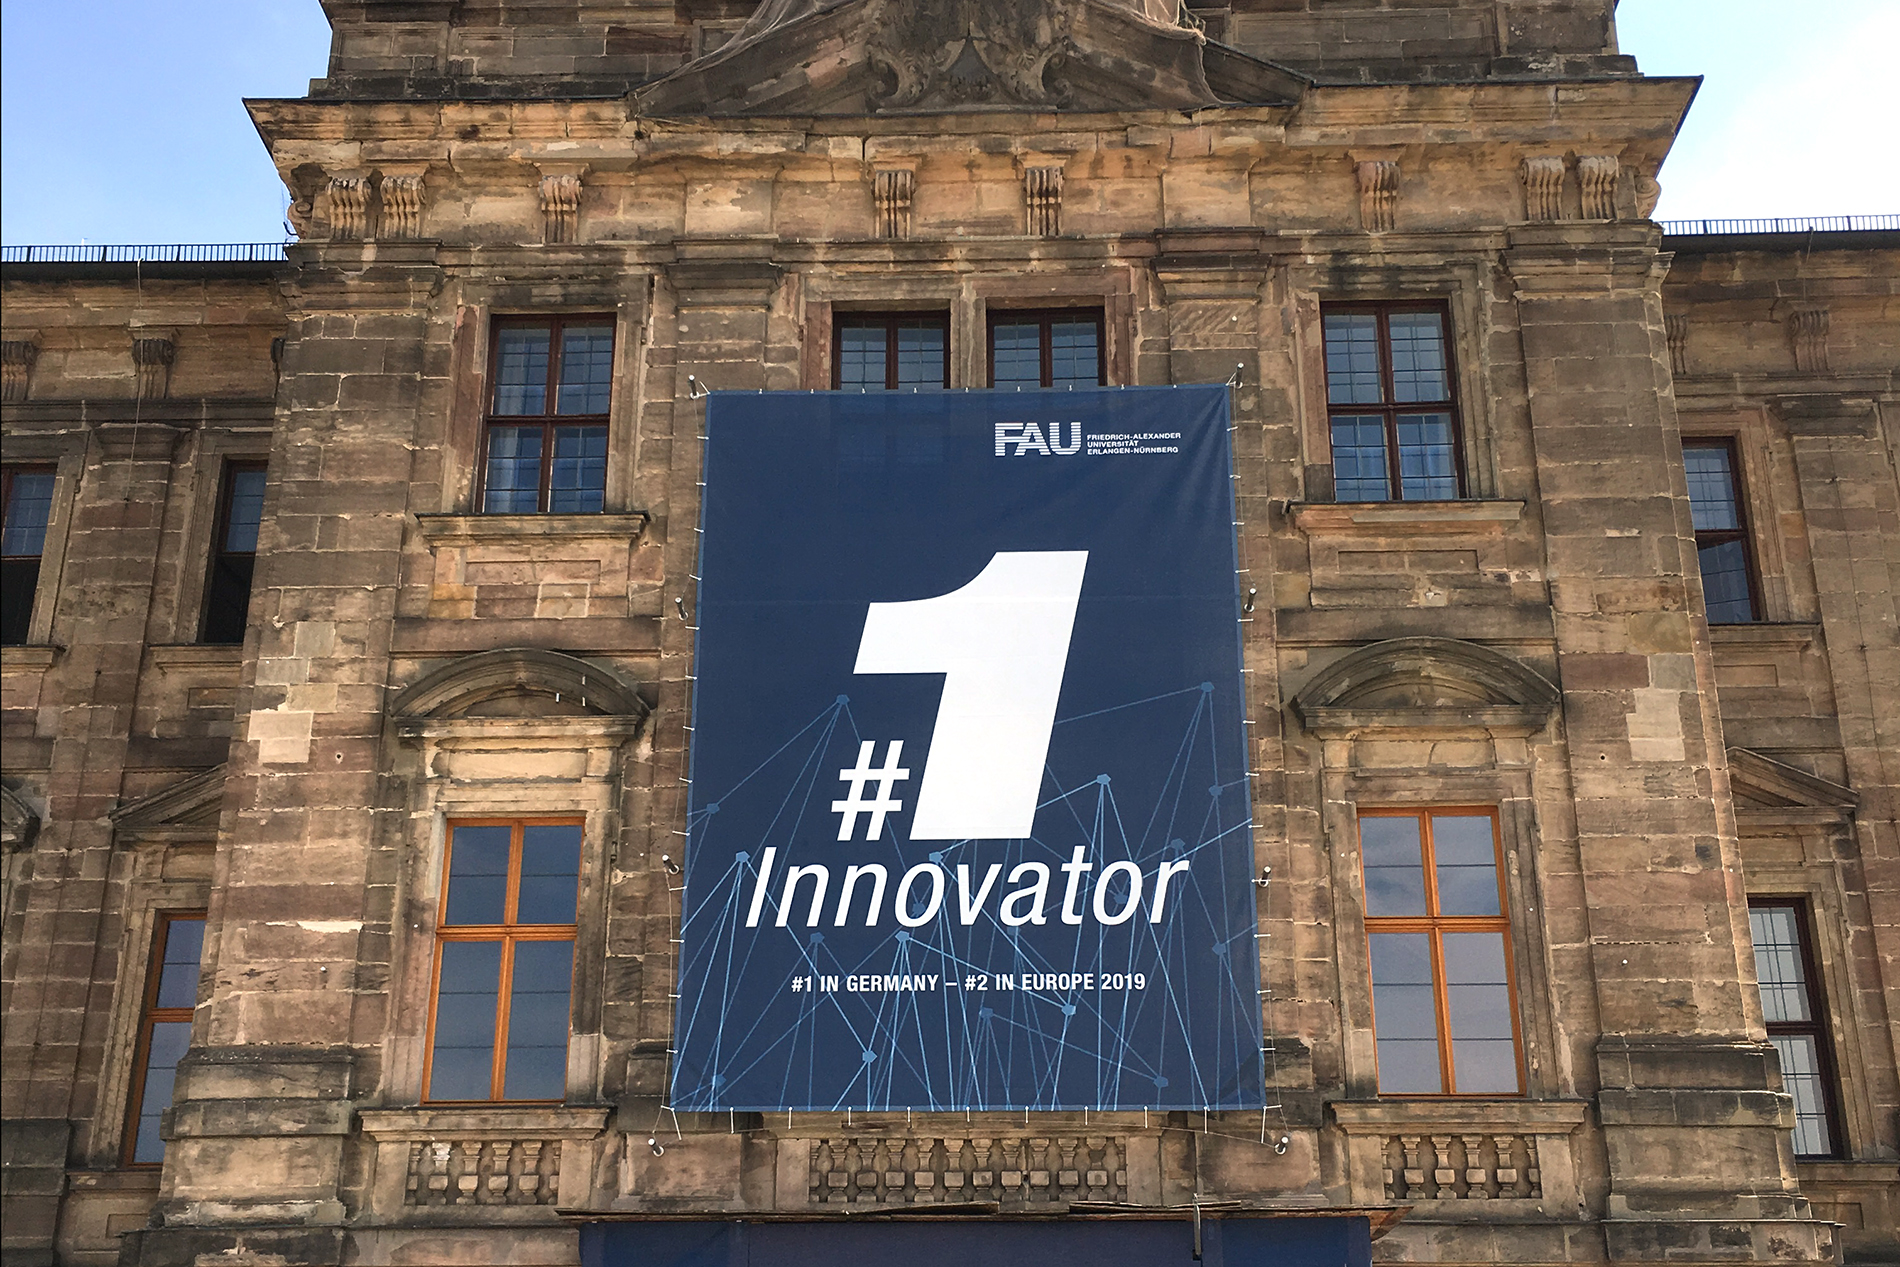 Towards page "Innovation and start-ups